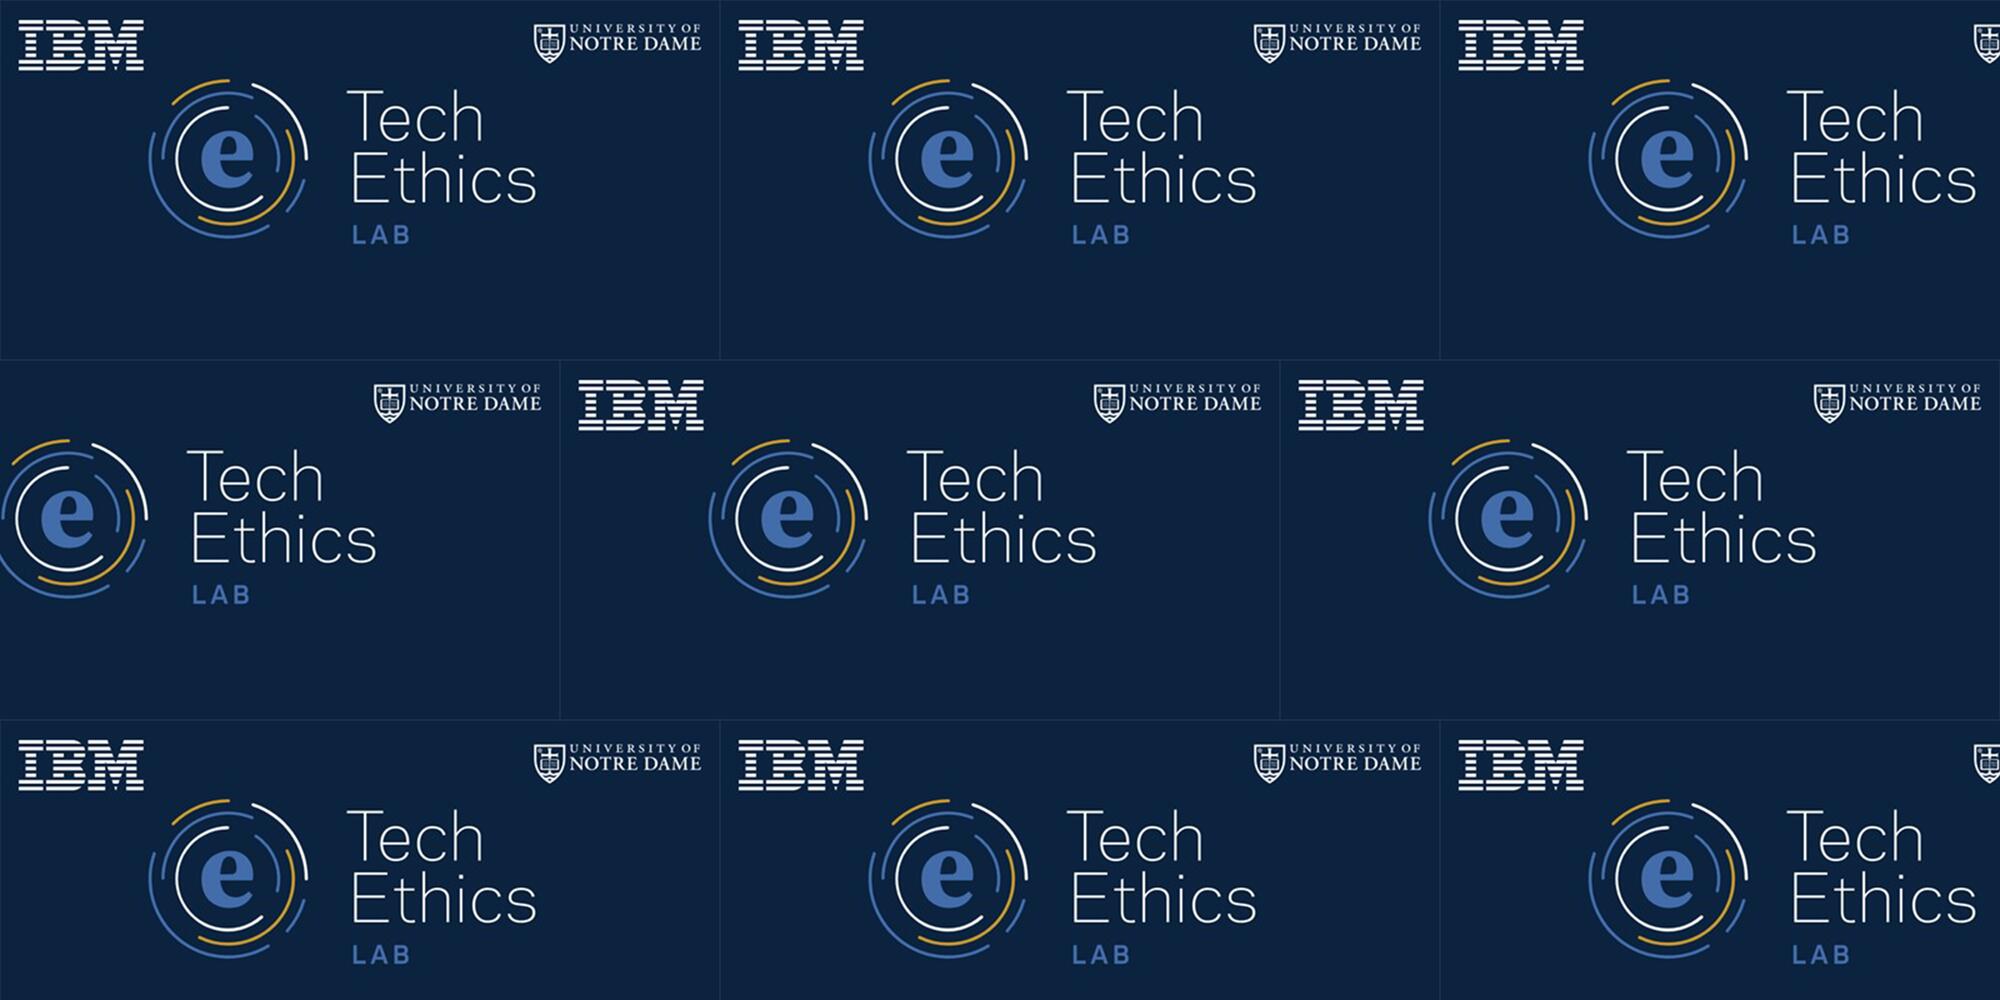 Tech Ethics Lab name and logo, a lower-case e surrounded by colorful circles, centered below the logos of IBM and the University of Notre Dame.